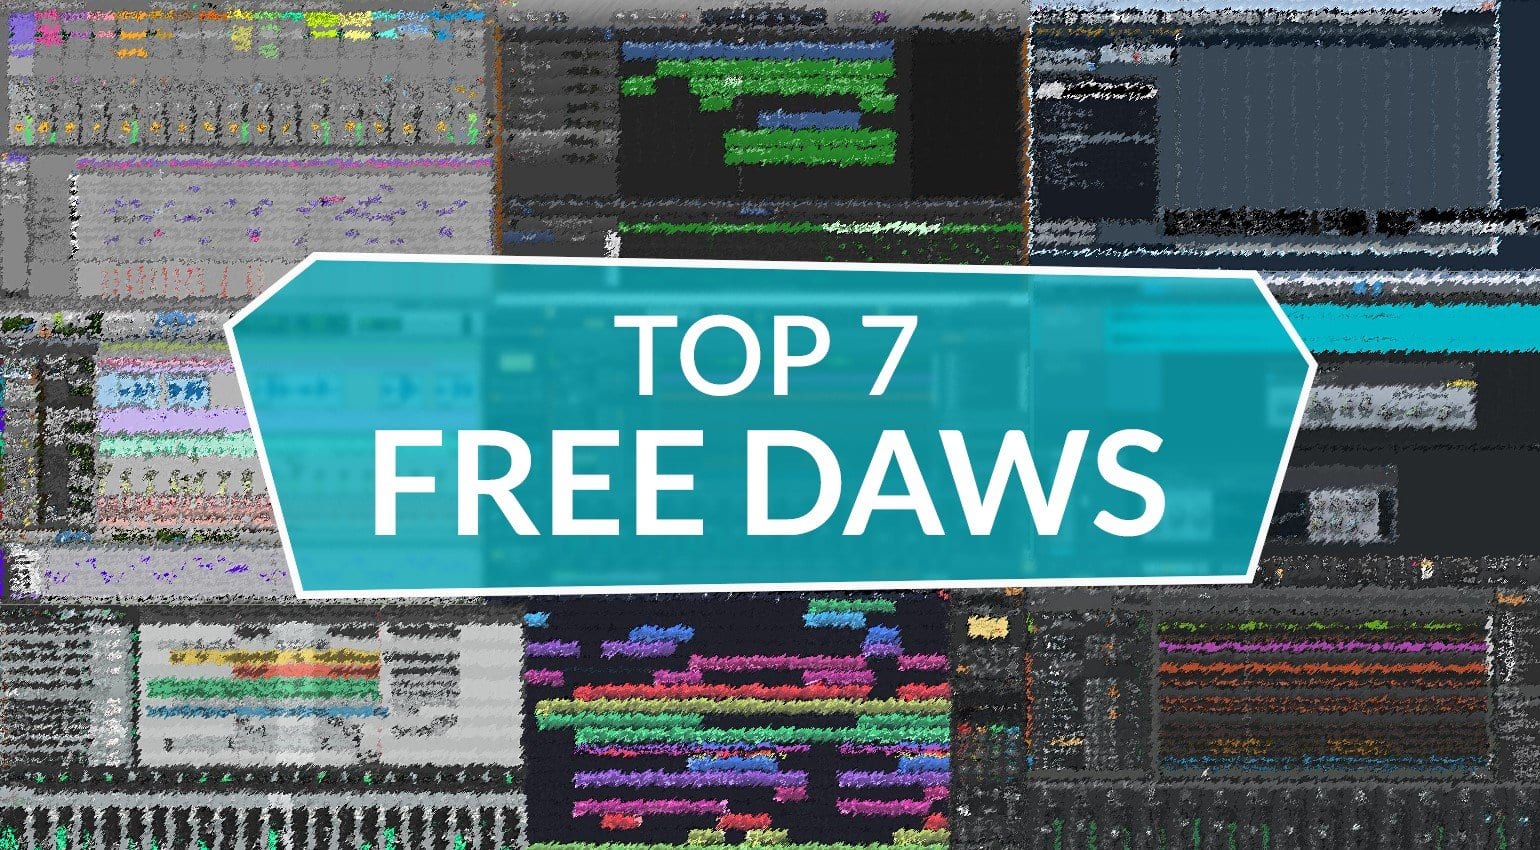 the best free recording software